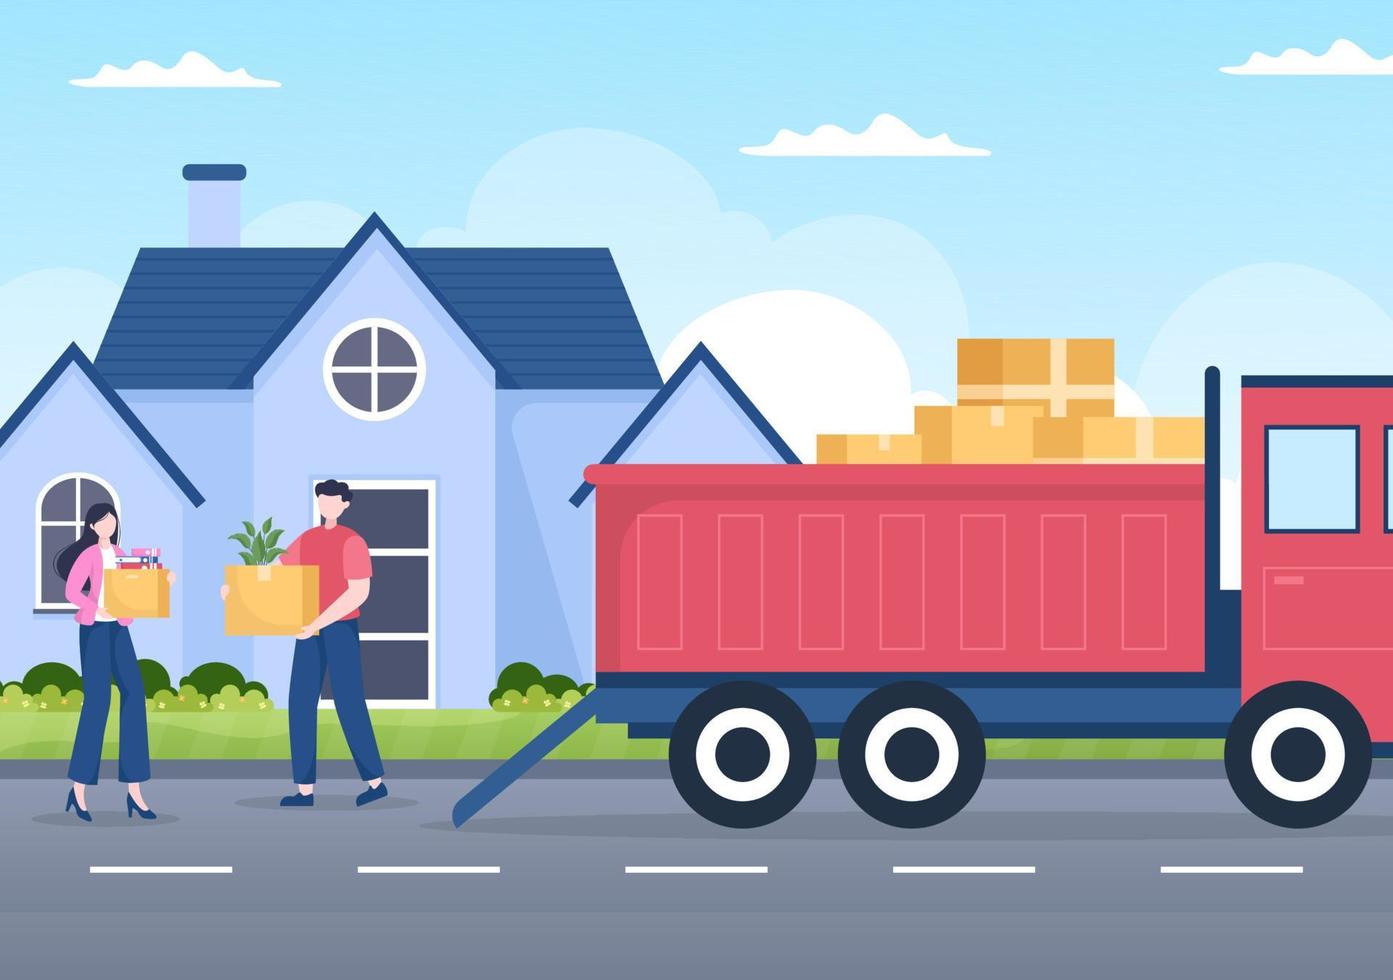 Home Relocation or People Moving with Cardboard Packaging Boxes or Pack Belongings Move to New Ones in Flat Cartoon Illustration vector